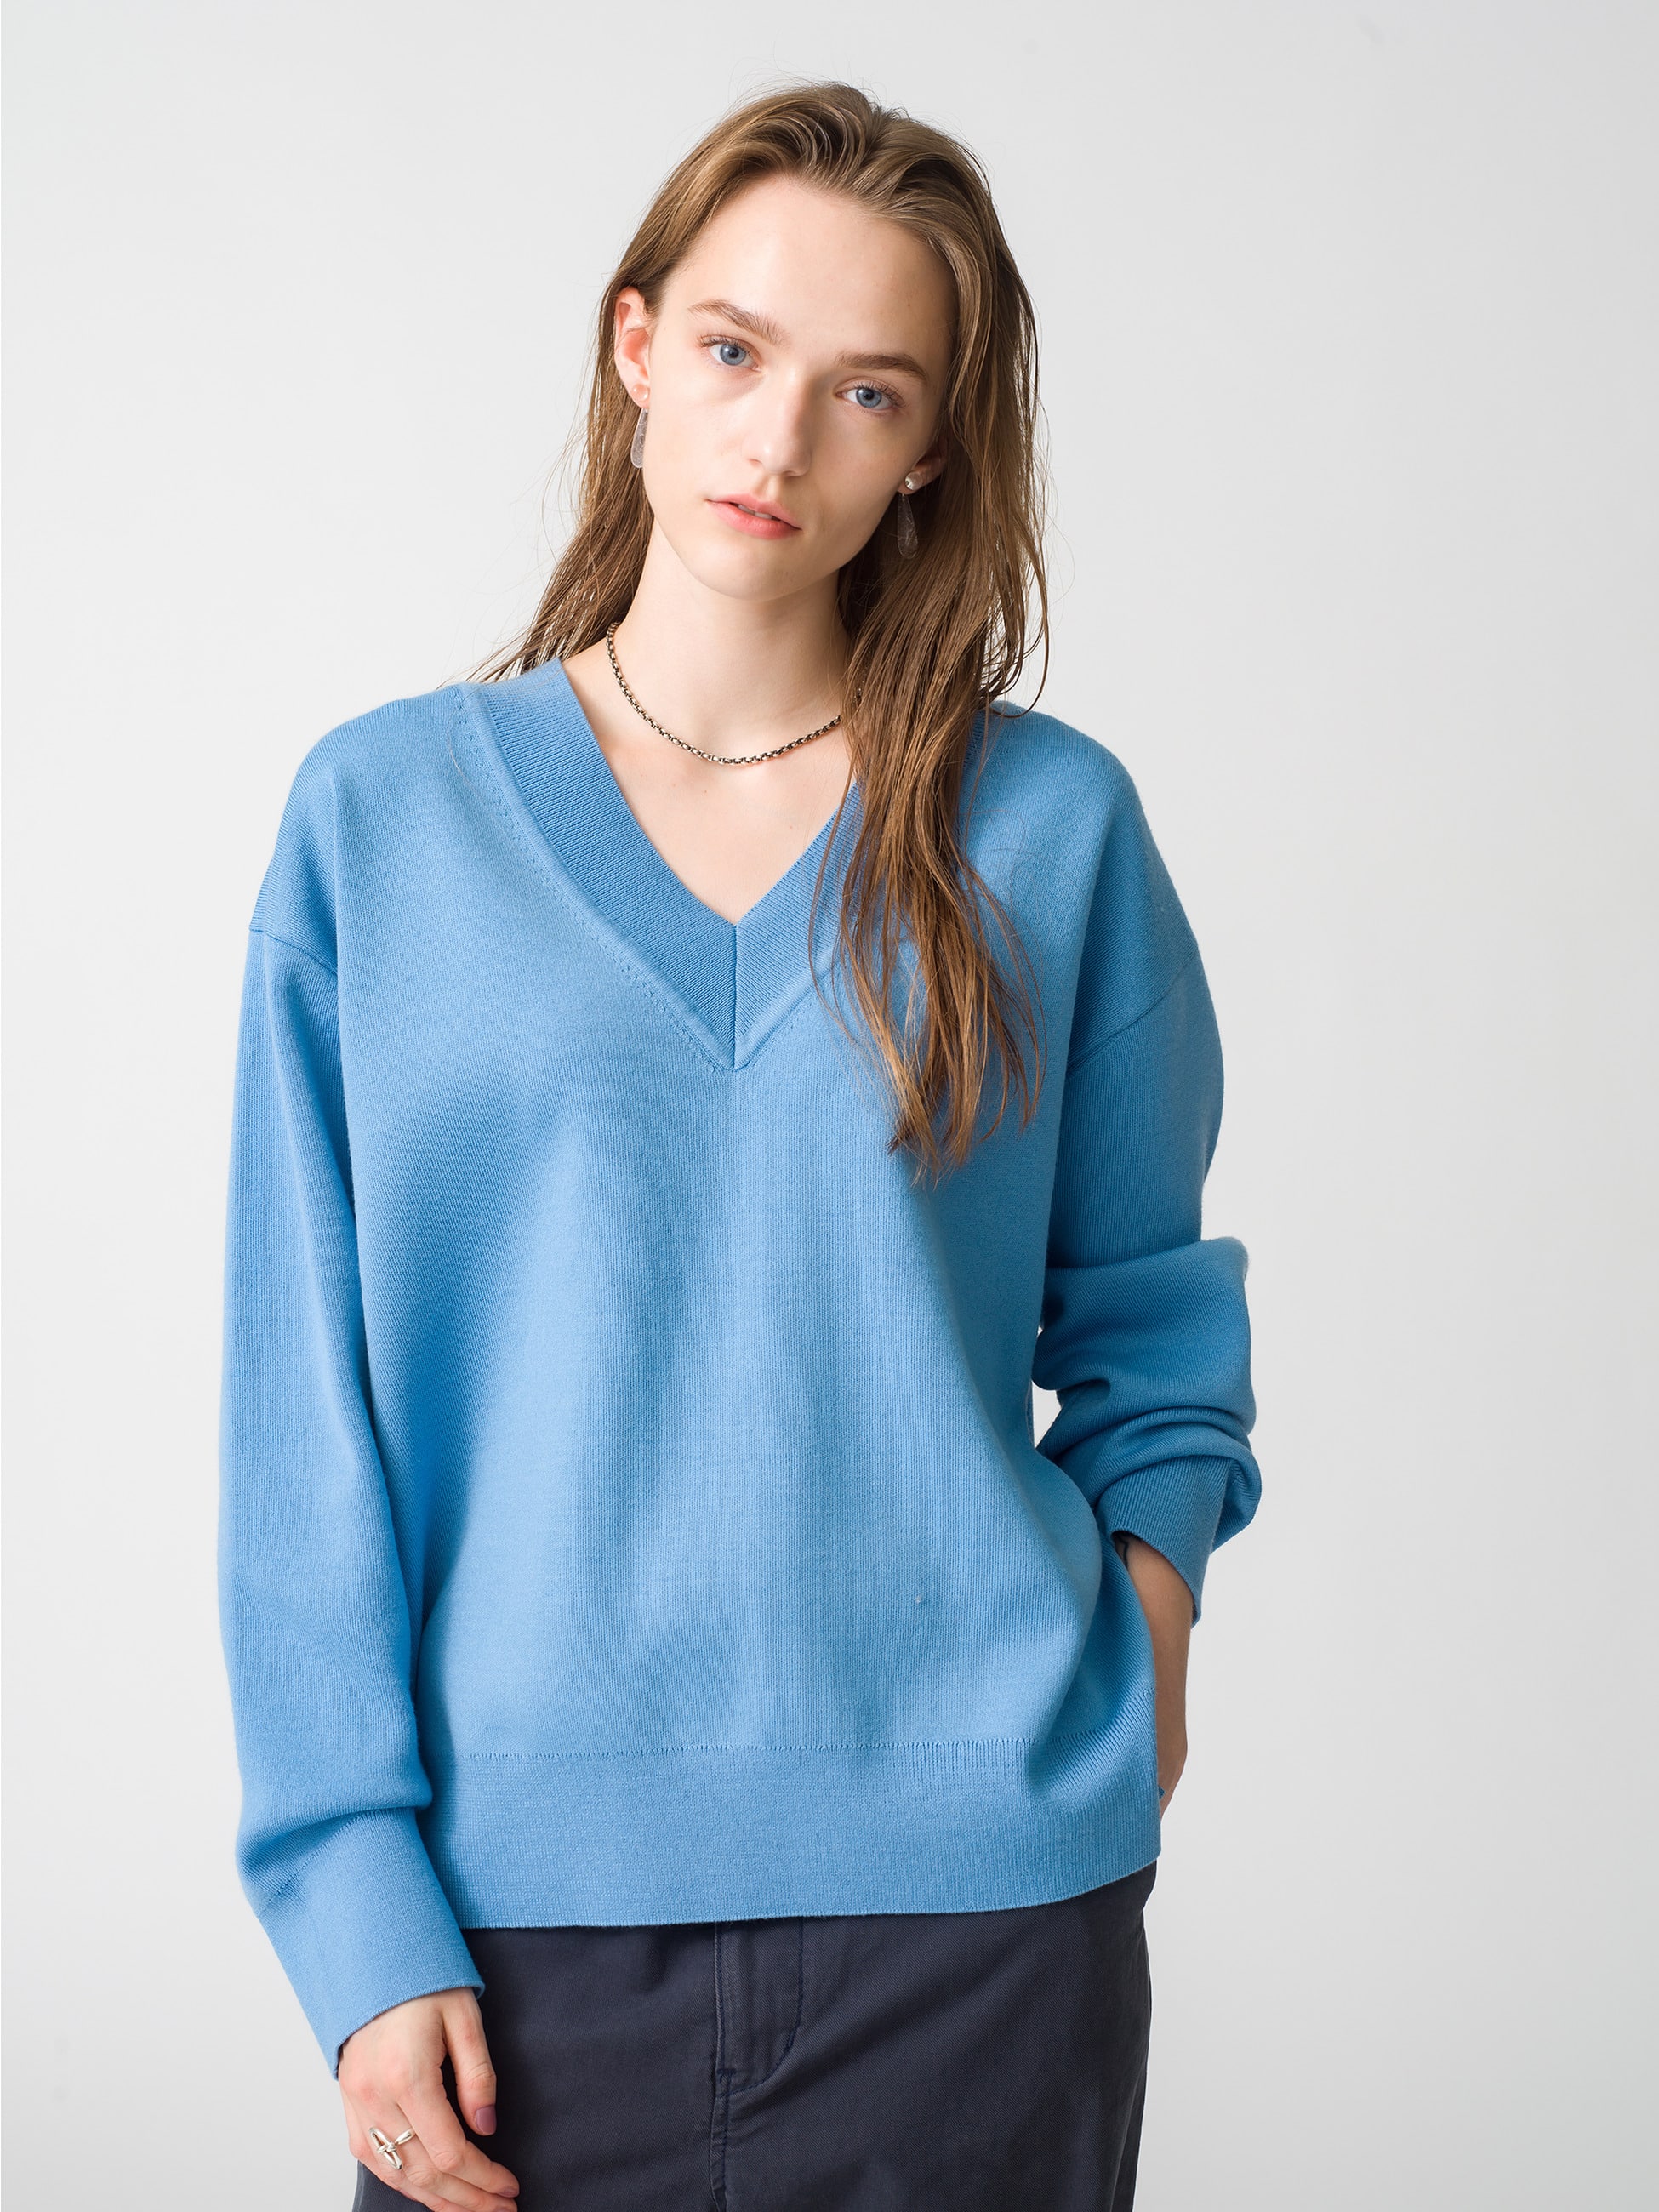 Wool Smooth V Neck Pullover｜Ron Herman(ロンハーマン)｜Ron Herman